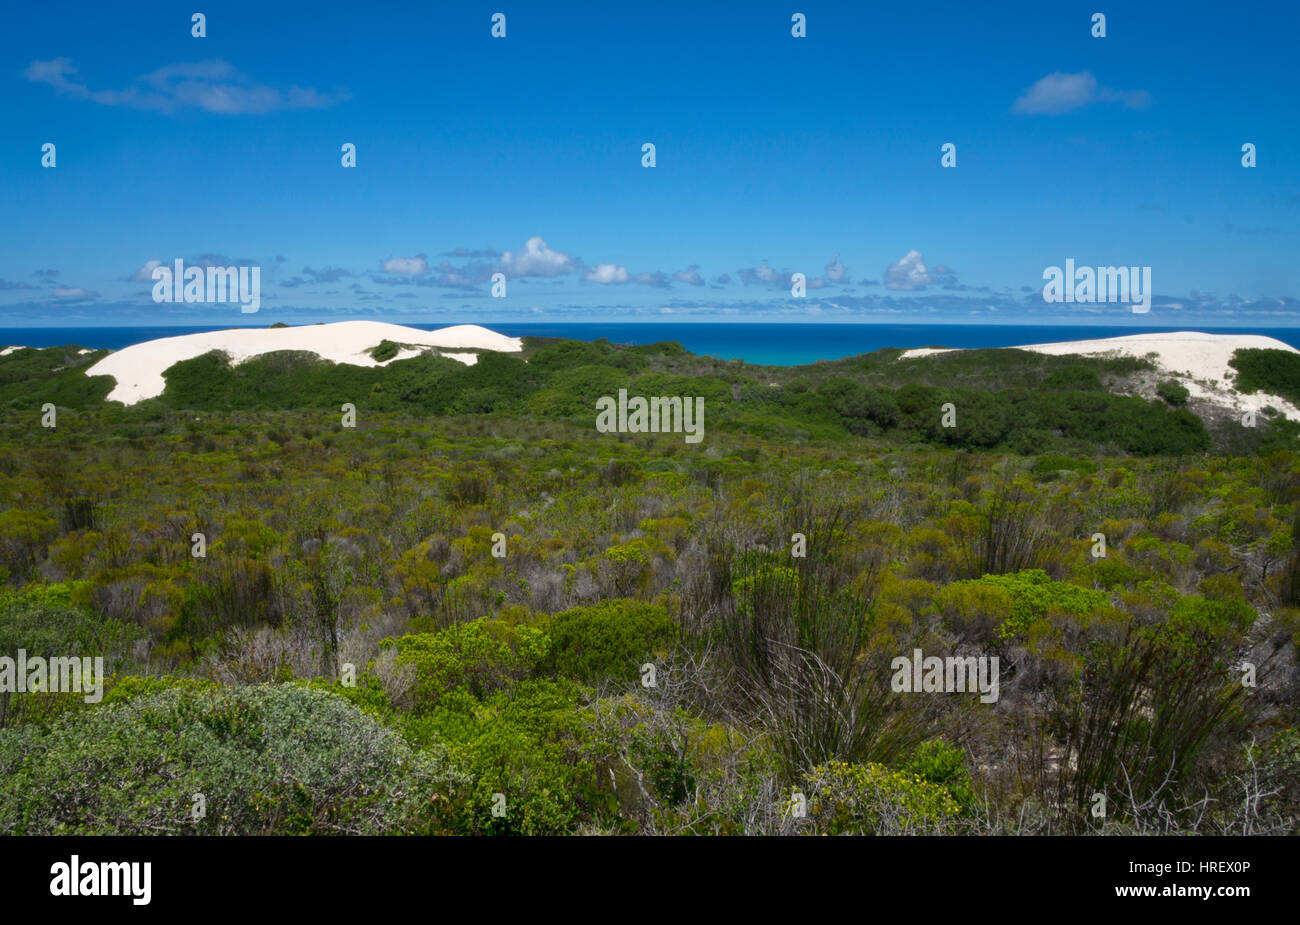 Vegetation and sand dunes at De Hoop Nature Reserve,Overberg,western cape,South Africa Stock Photo